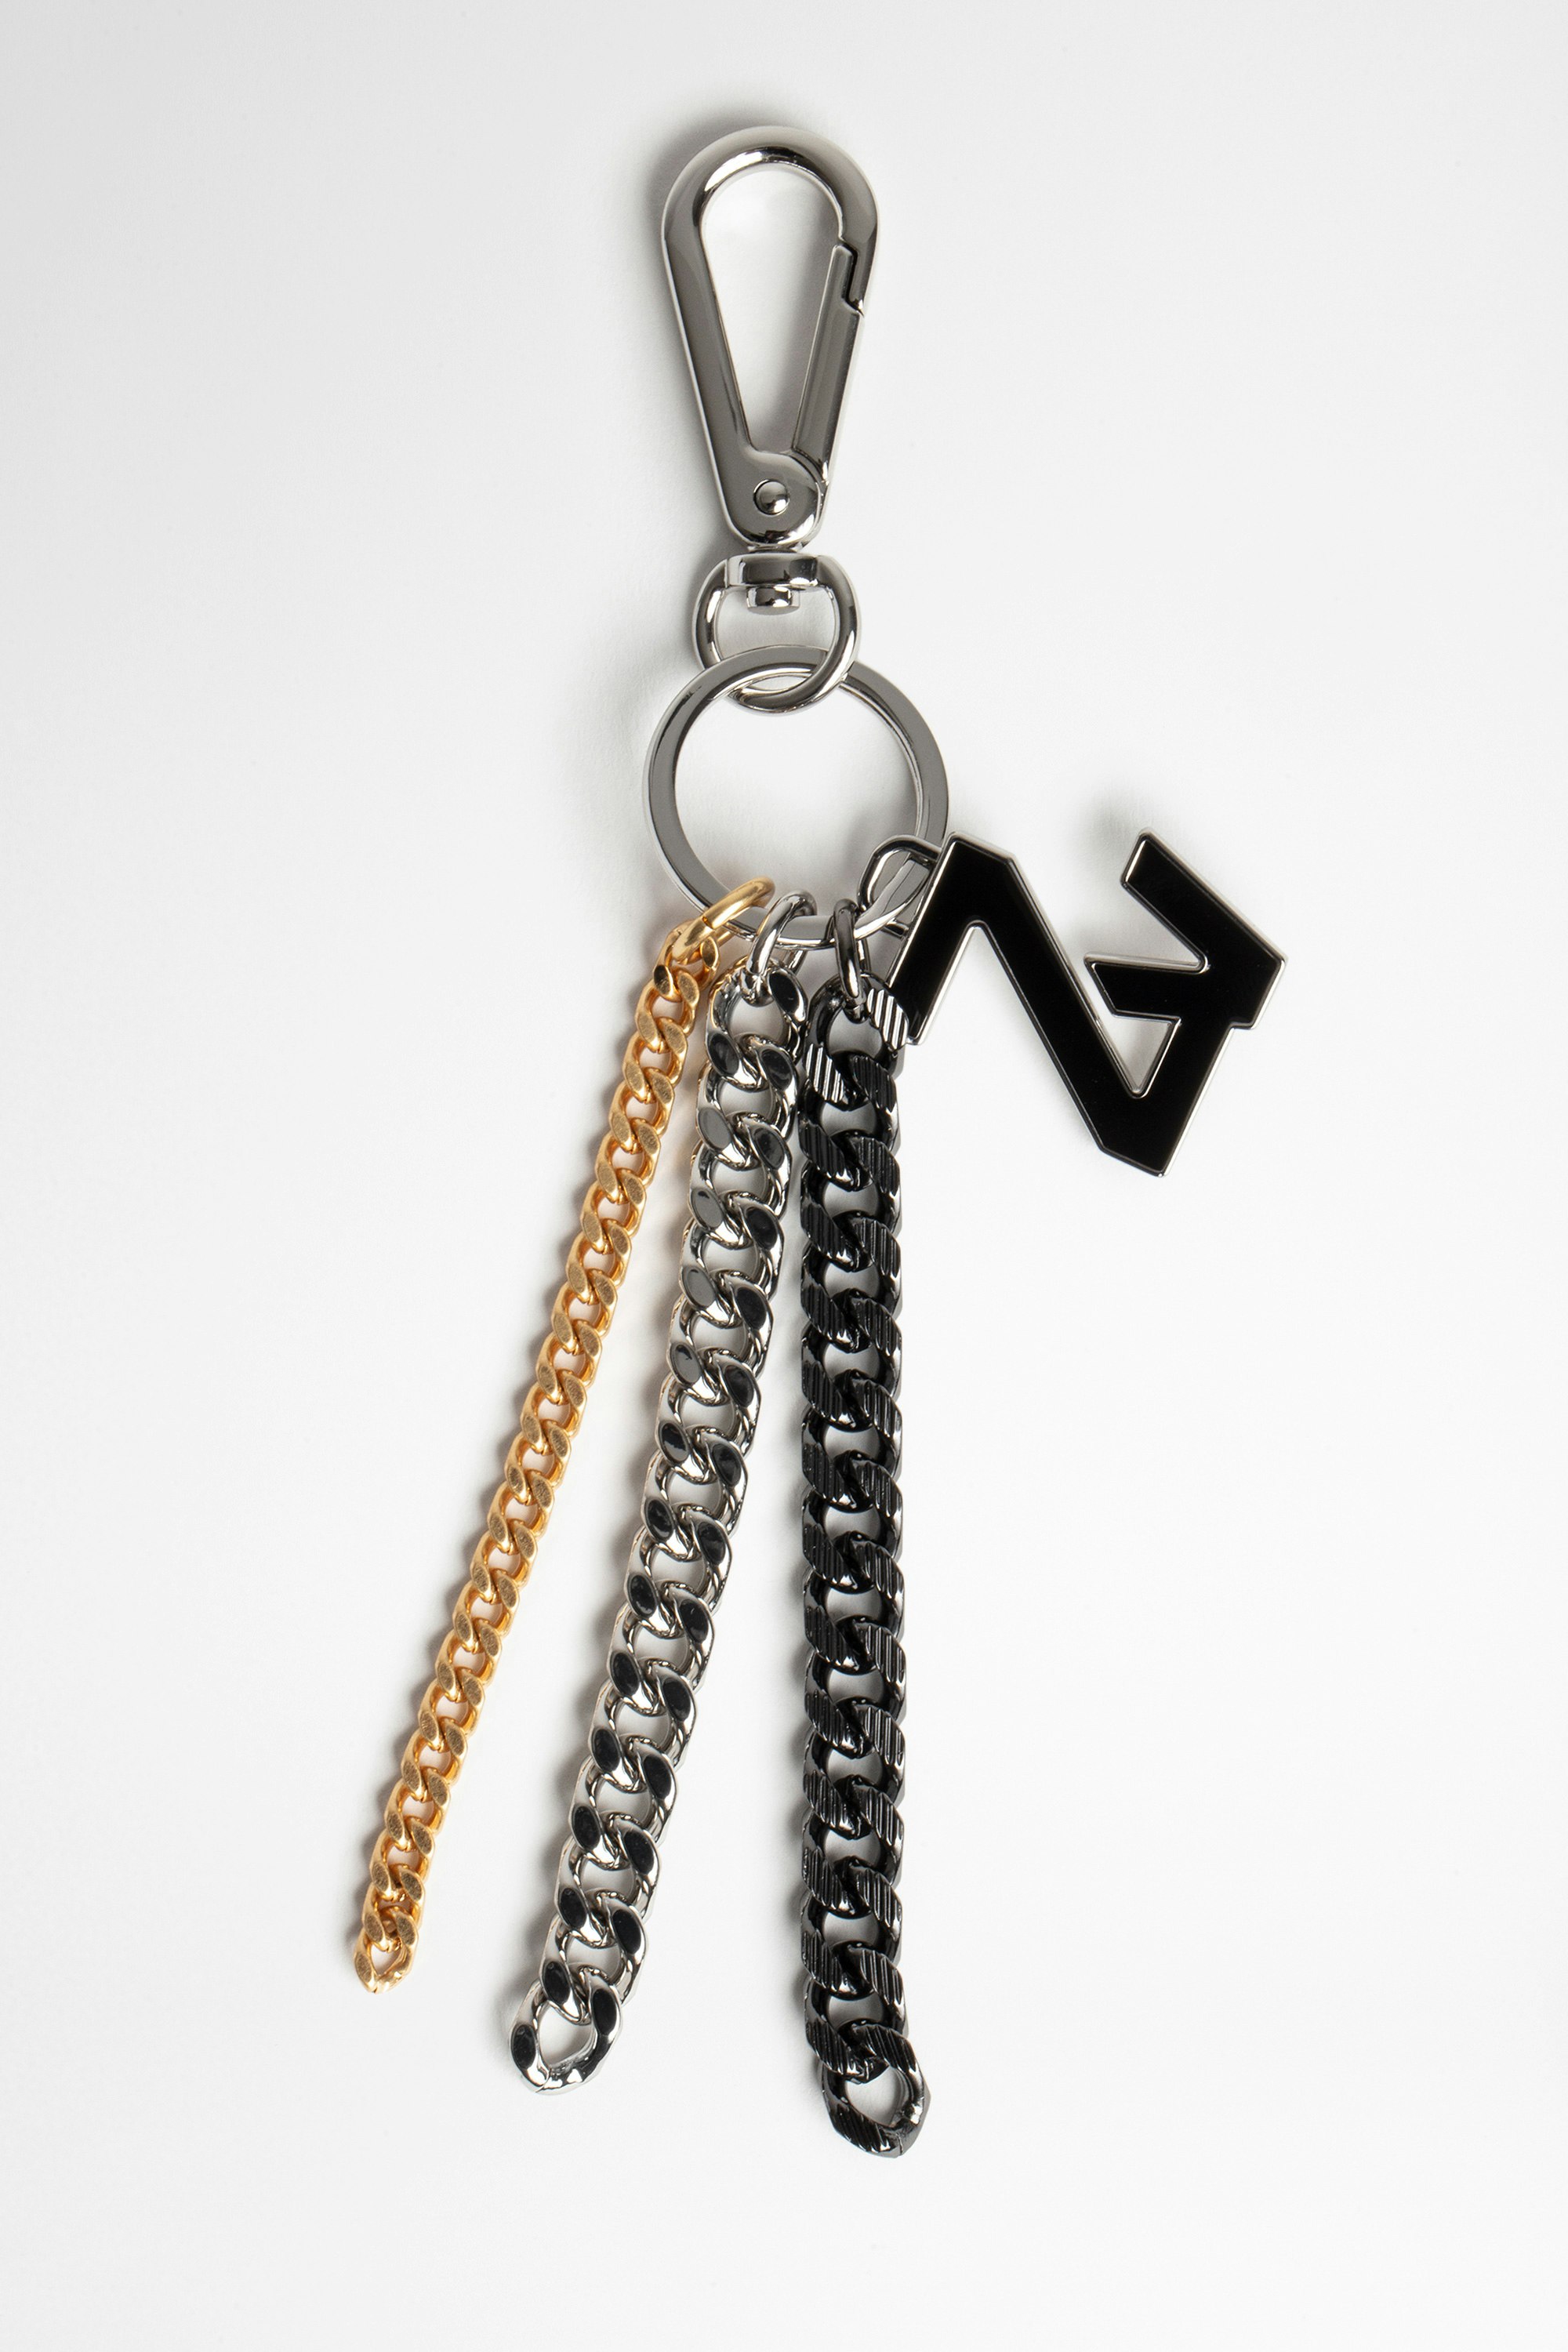 ZV Initiale Le Keyring ZV Initiale chain key ring